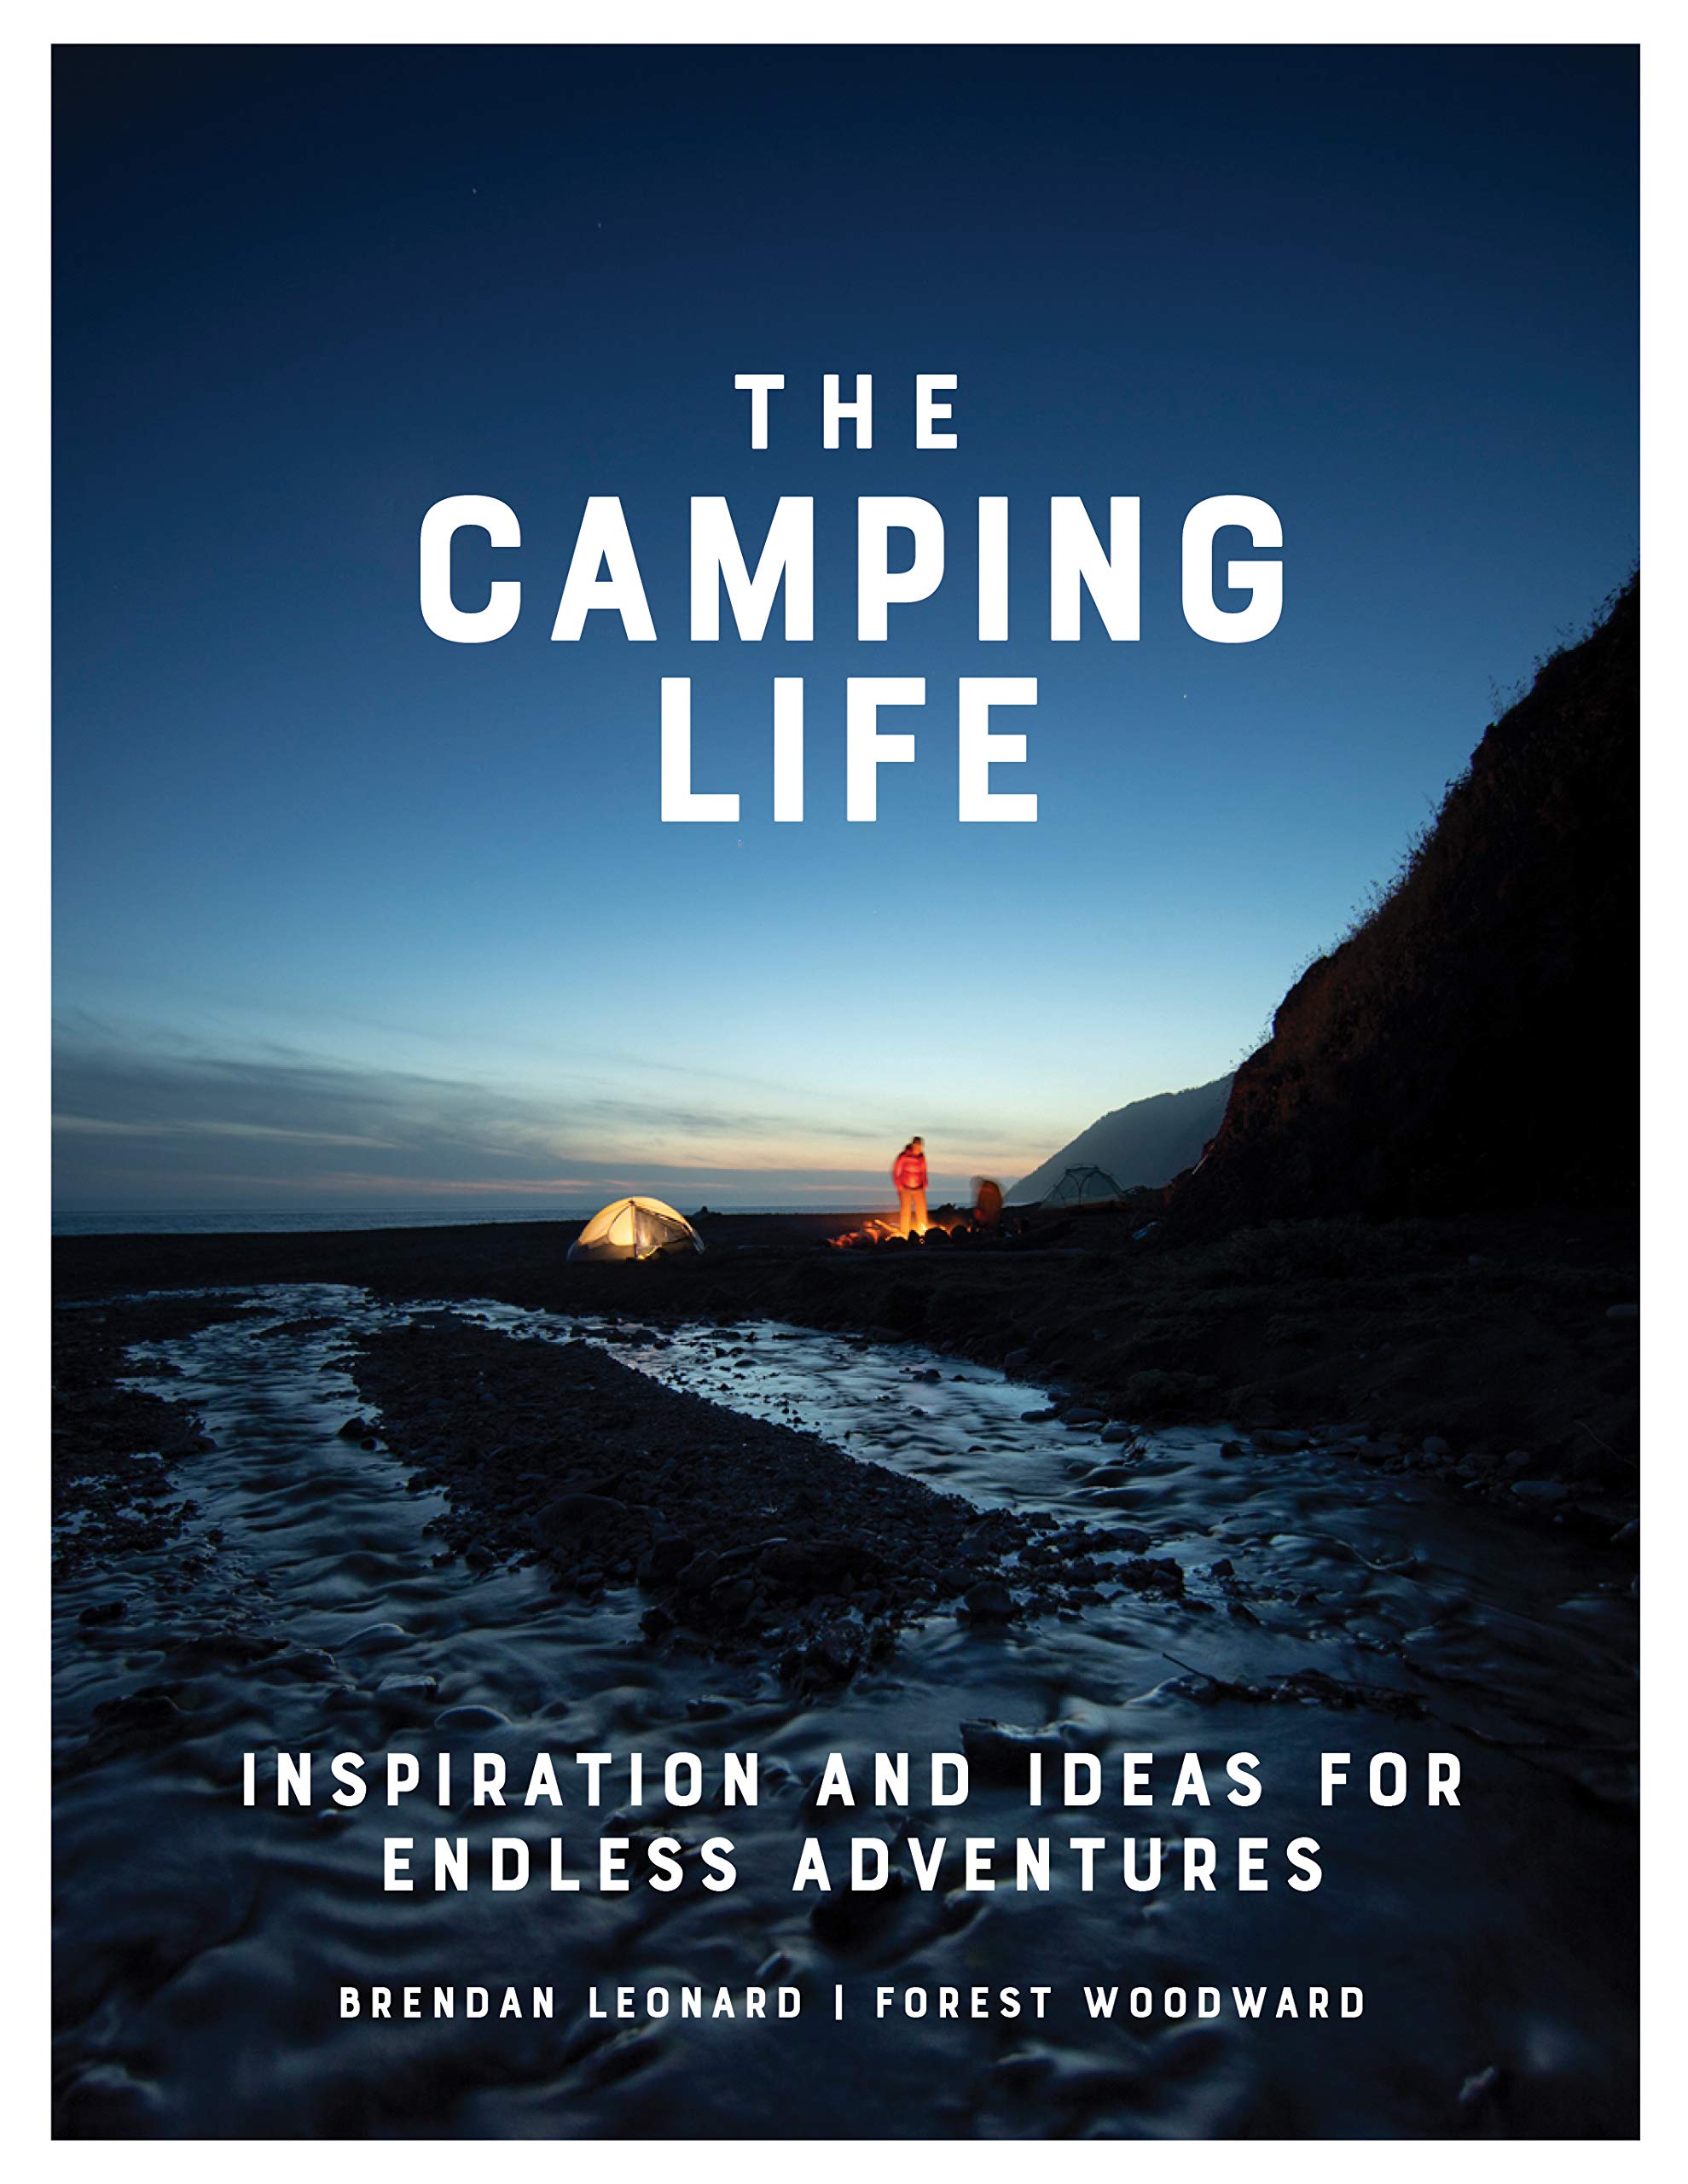 The Camping Life: Inspiration and Ideas for Endless Adventures by Brendan Leonard